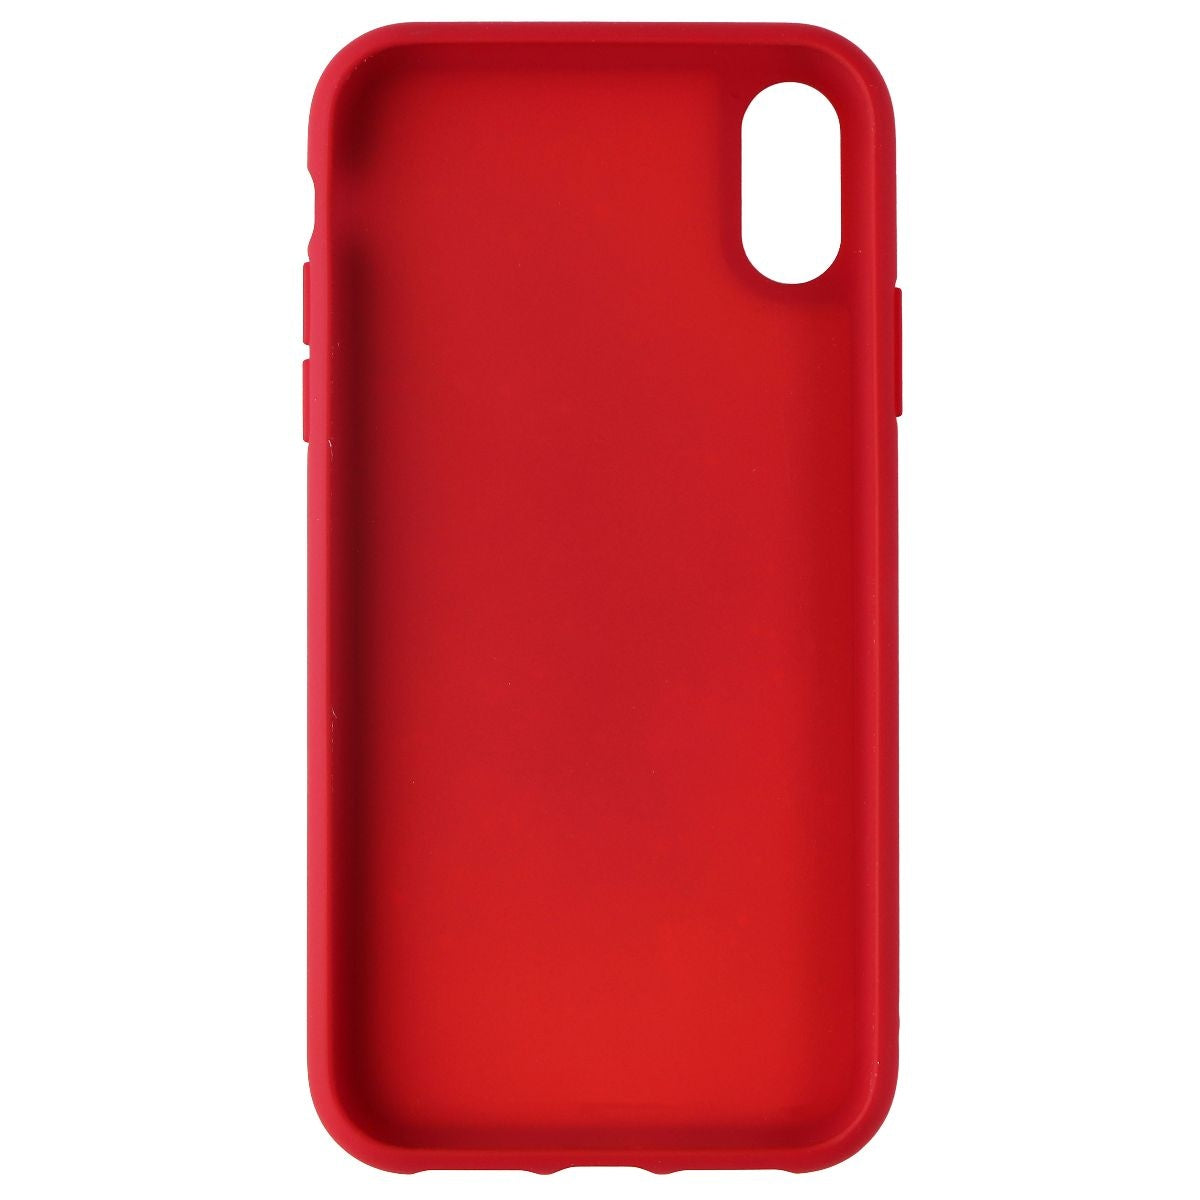 Adidas 3-Strips Snap Case for Apple iPhone XR Smartphones - Red/White Stripe Cell Phone - Cases, Covers & Skins Adidas    - Simple Cell Bulk Wholesale Pricing - USA Seller